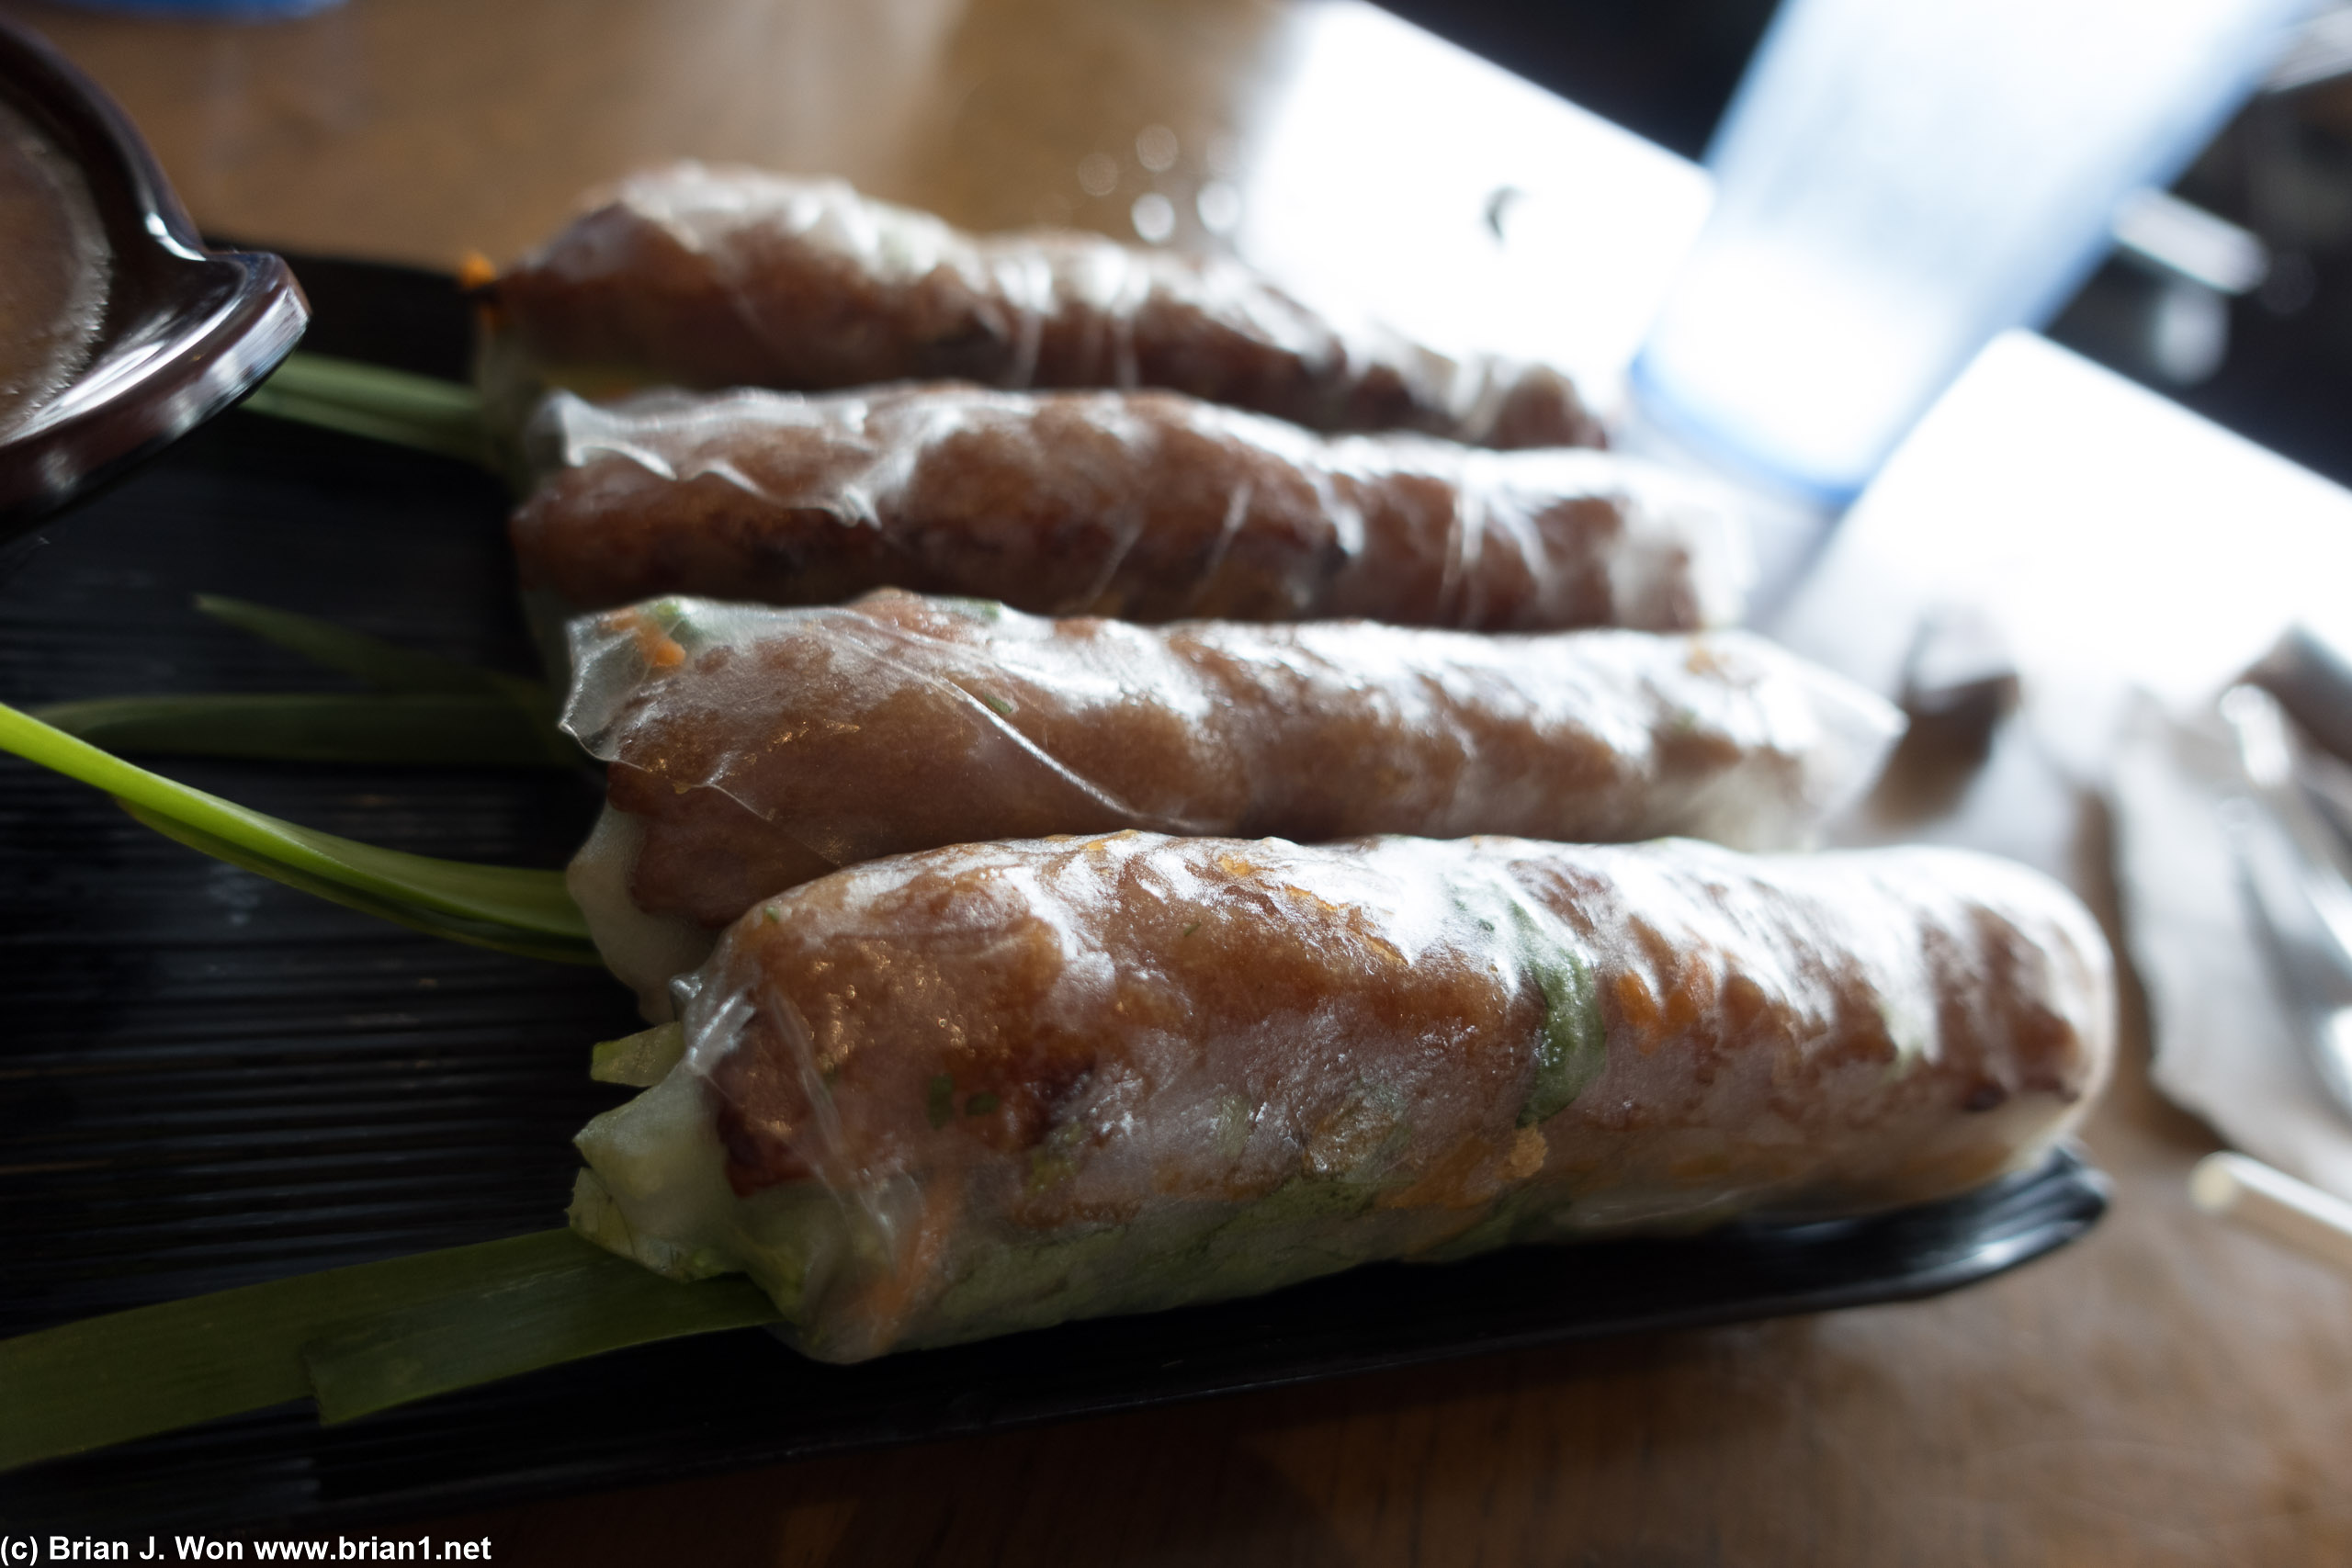 The traditional grilled pork patty (nem nuong cuon) were superb as always.